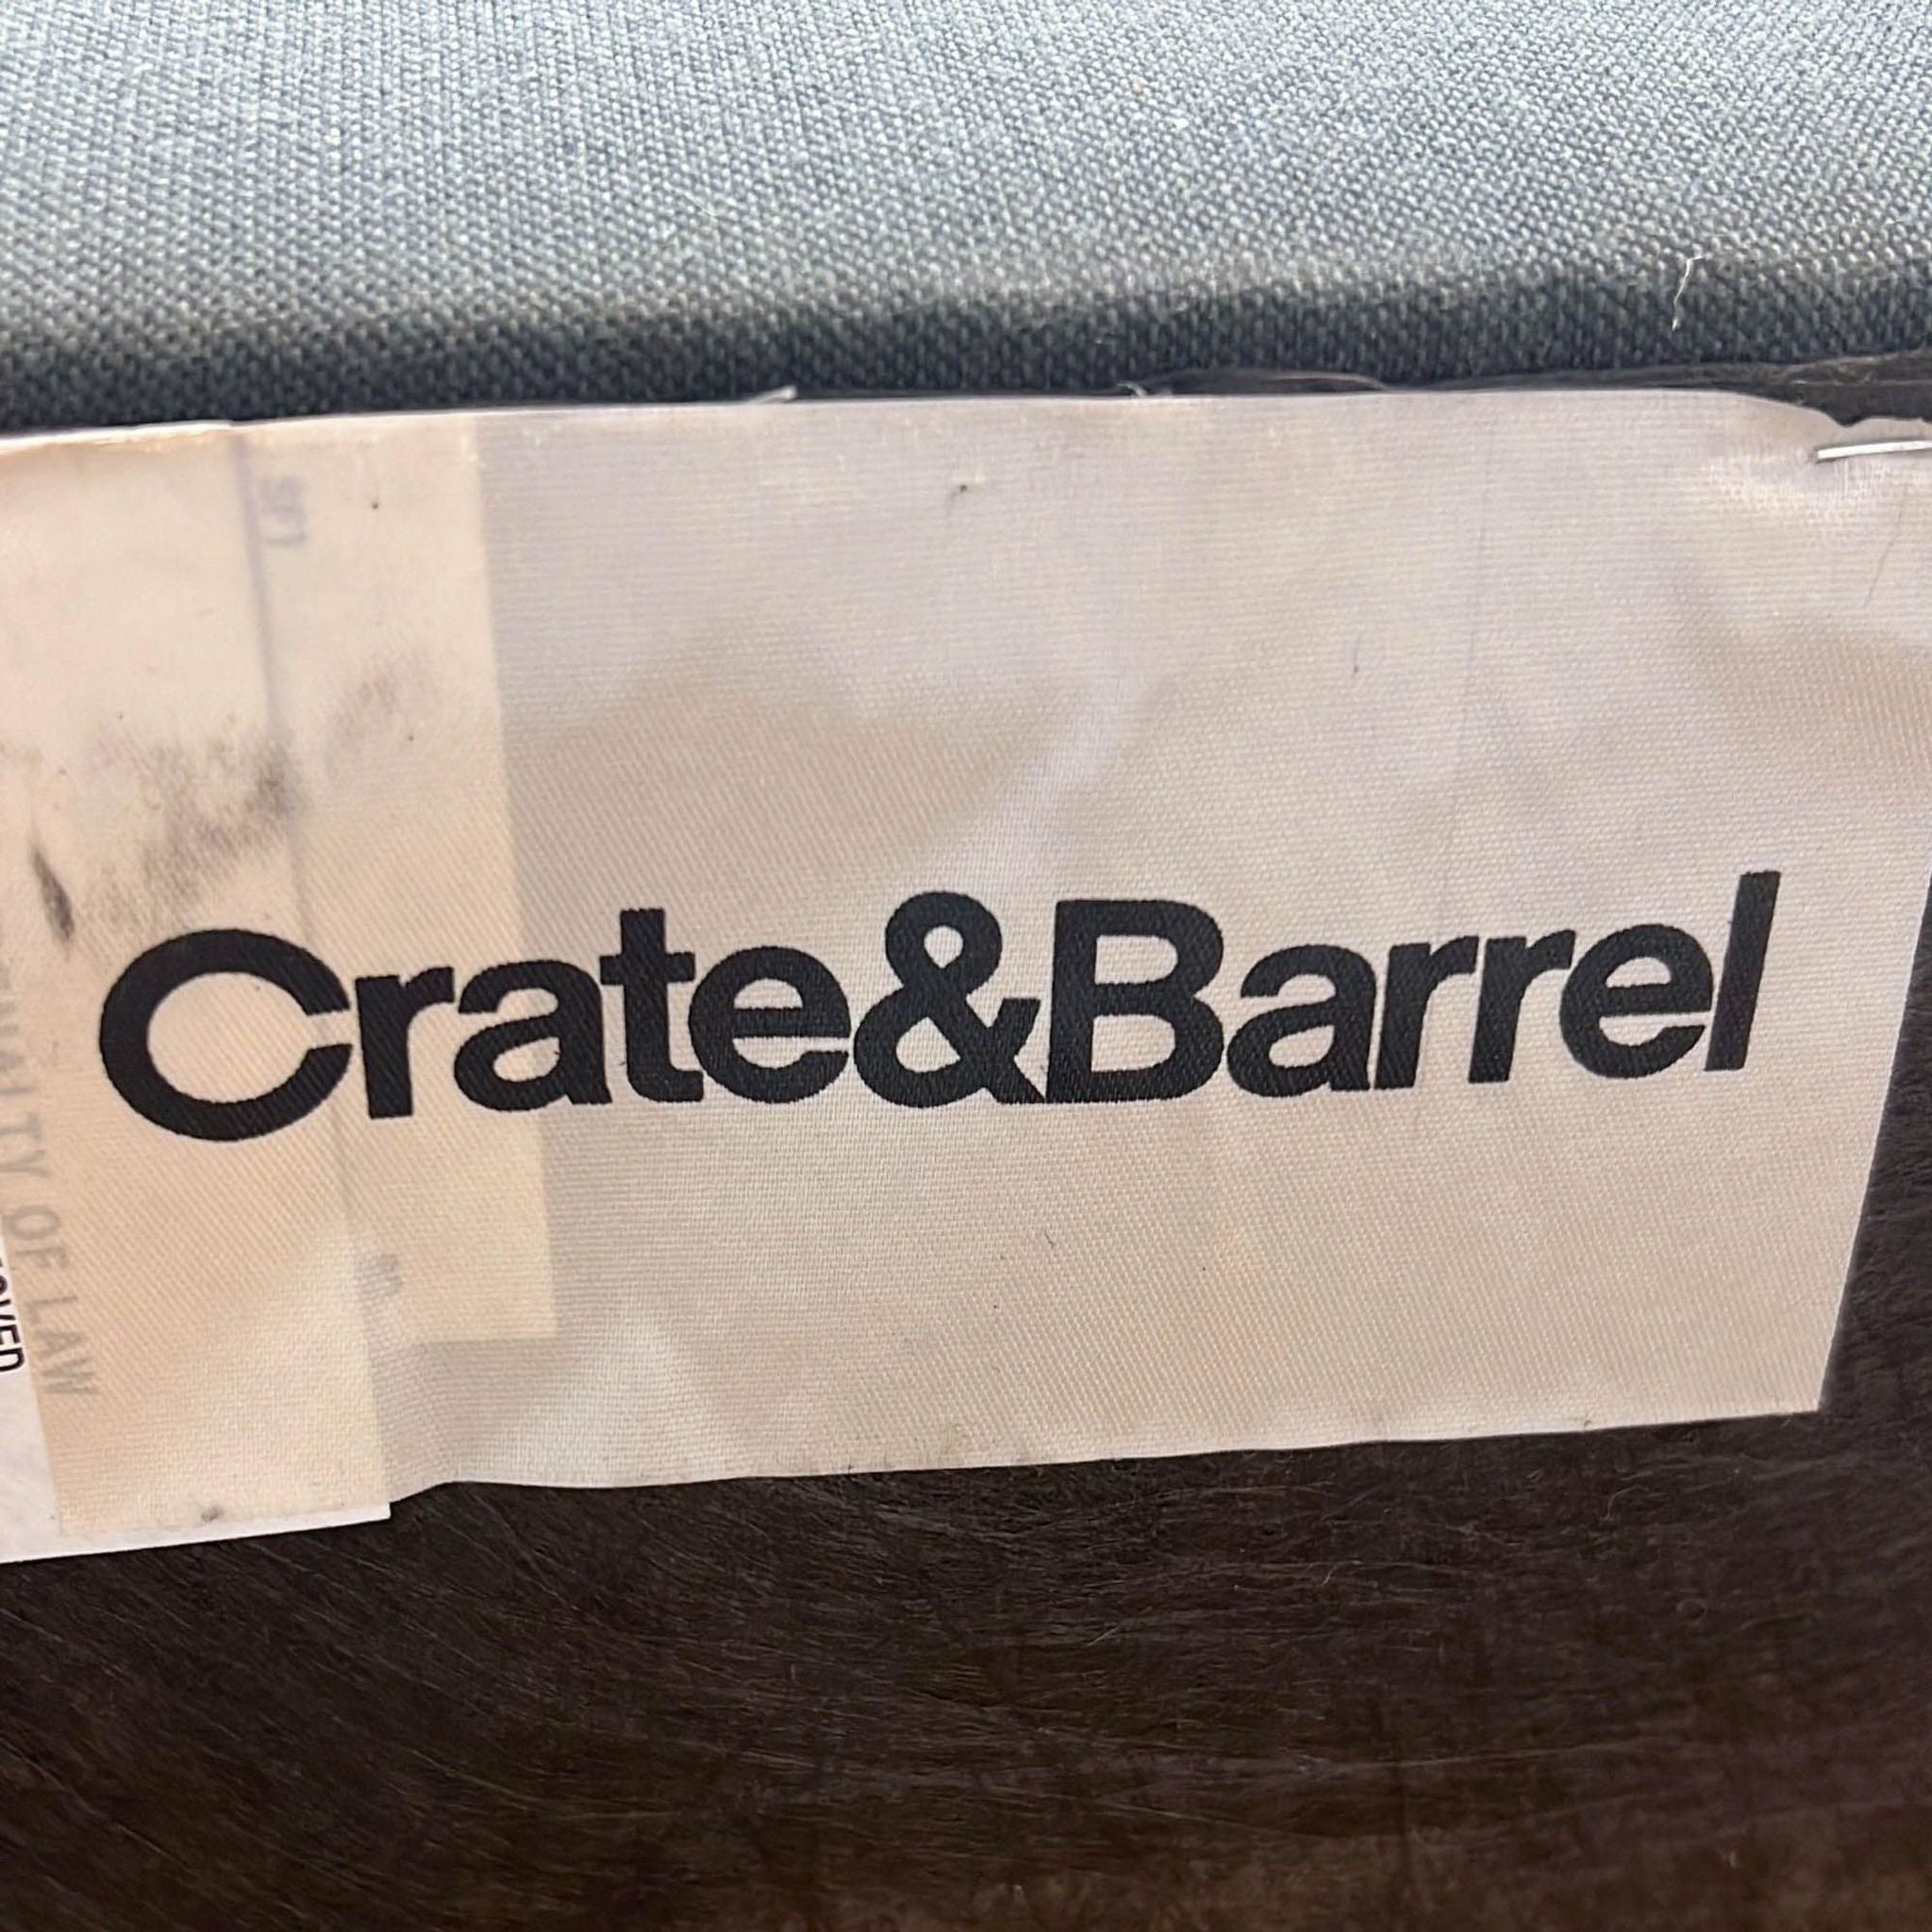 Close-up of Crate & Barrel label on a gray fabric ottoman, reflecting its brand identity.